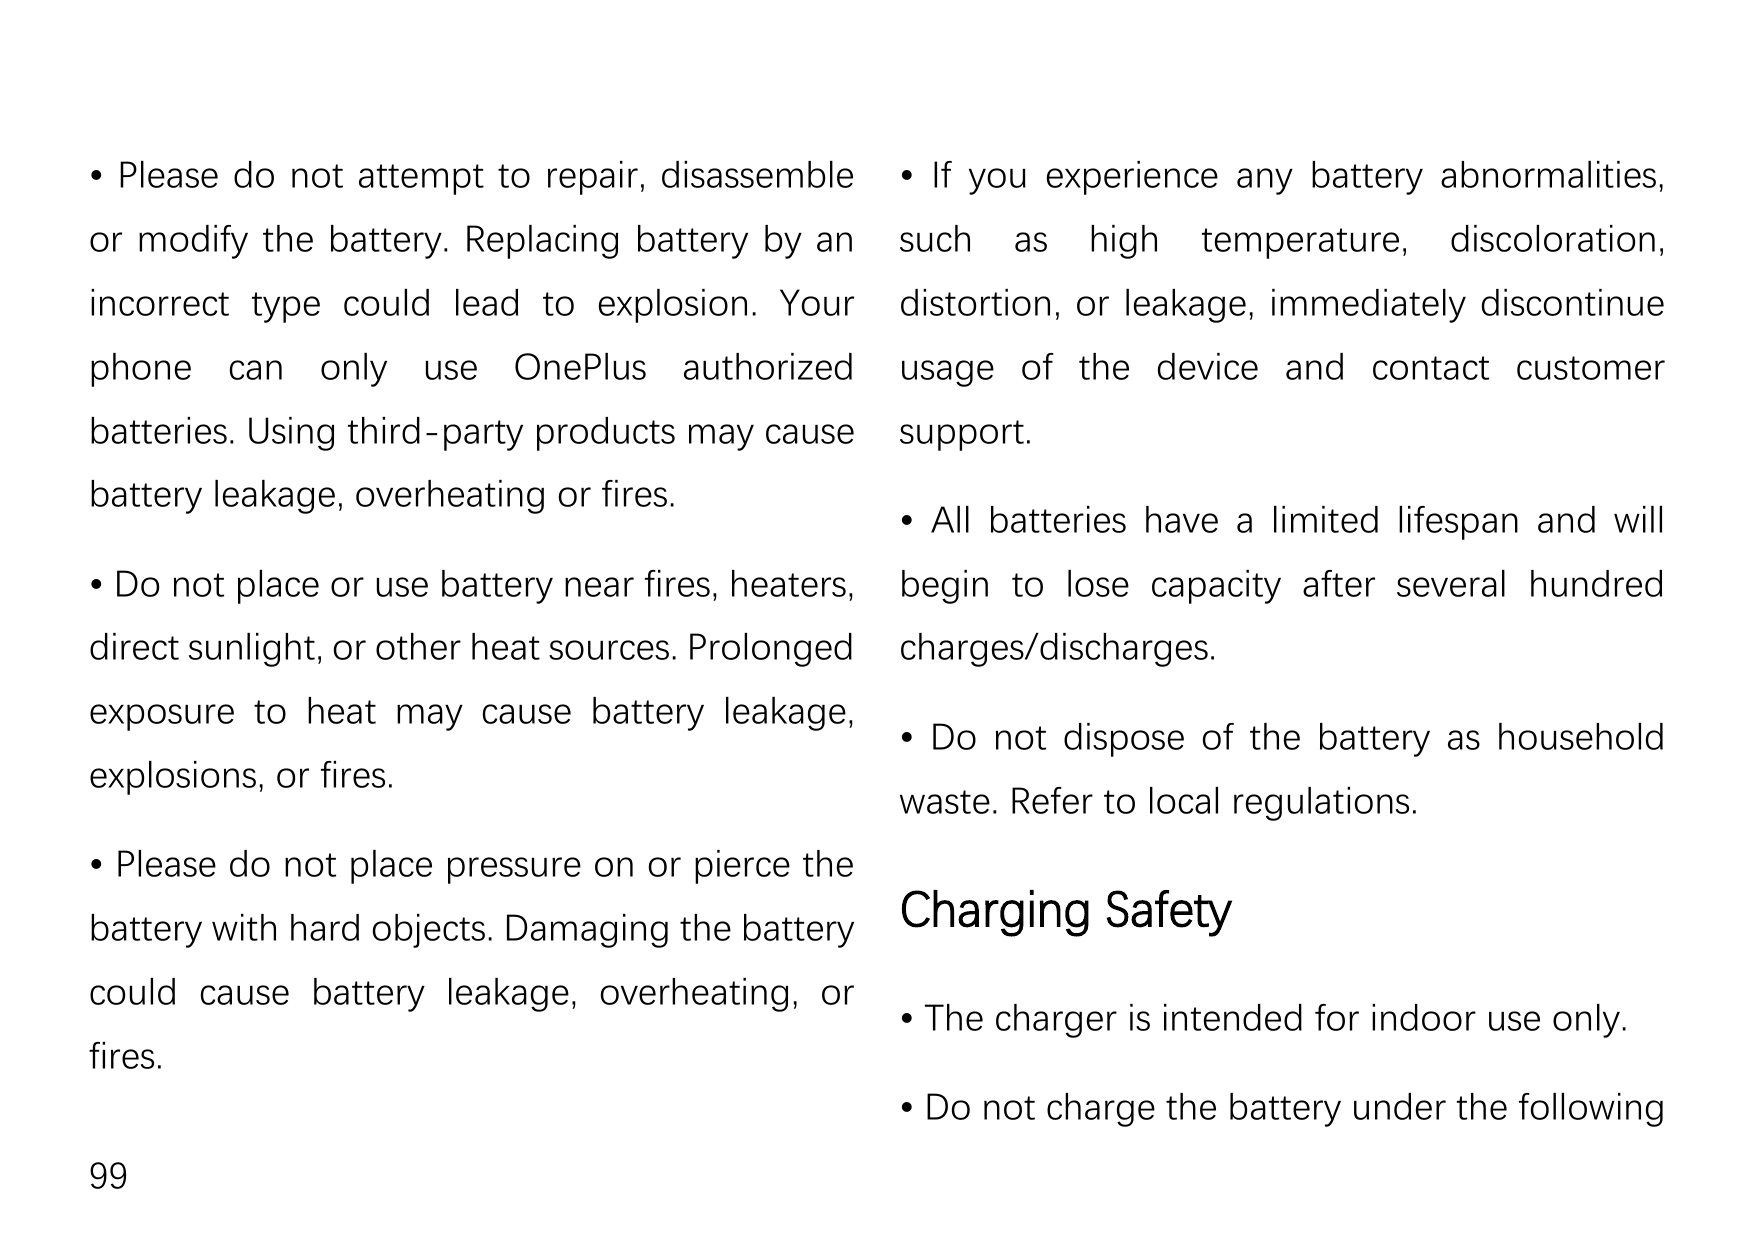 • Please do not attempt to repair, disassemble• If you experience any battery abnormalities,or modify the battery. Replacing bat